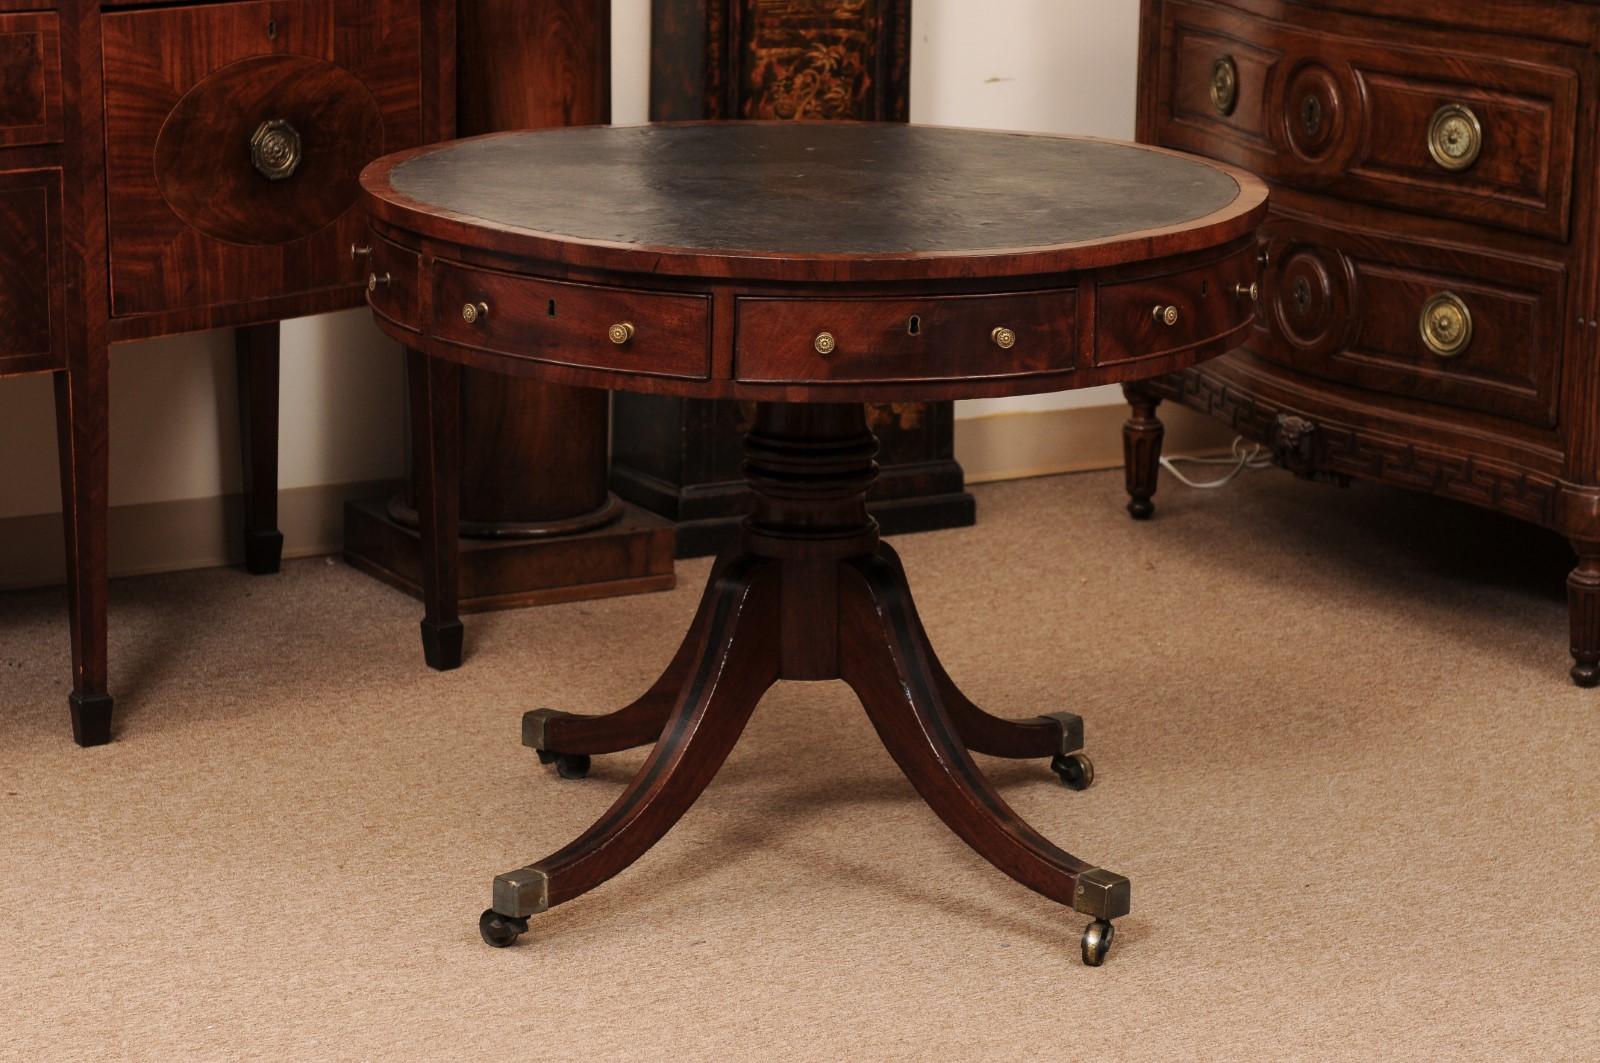 19th Century English Mahogany Drum Table with Black Leather Top For Sale 8